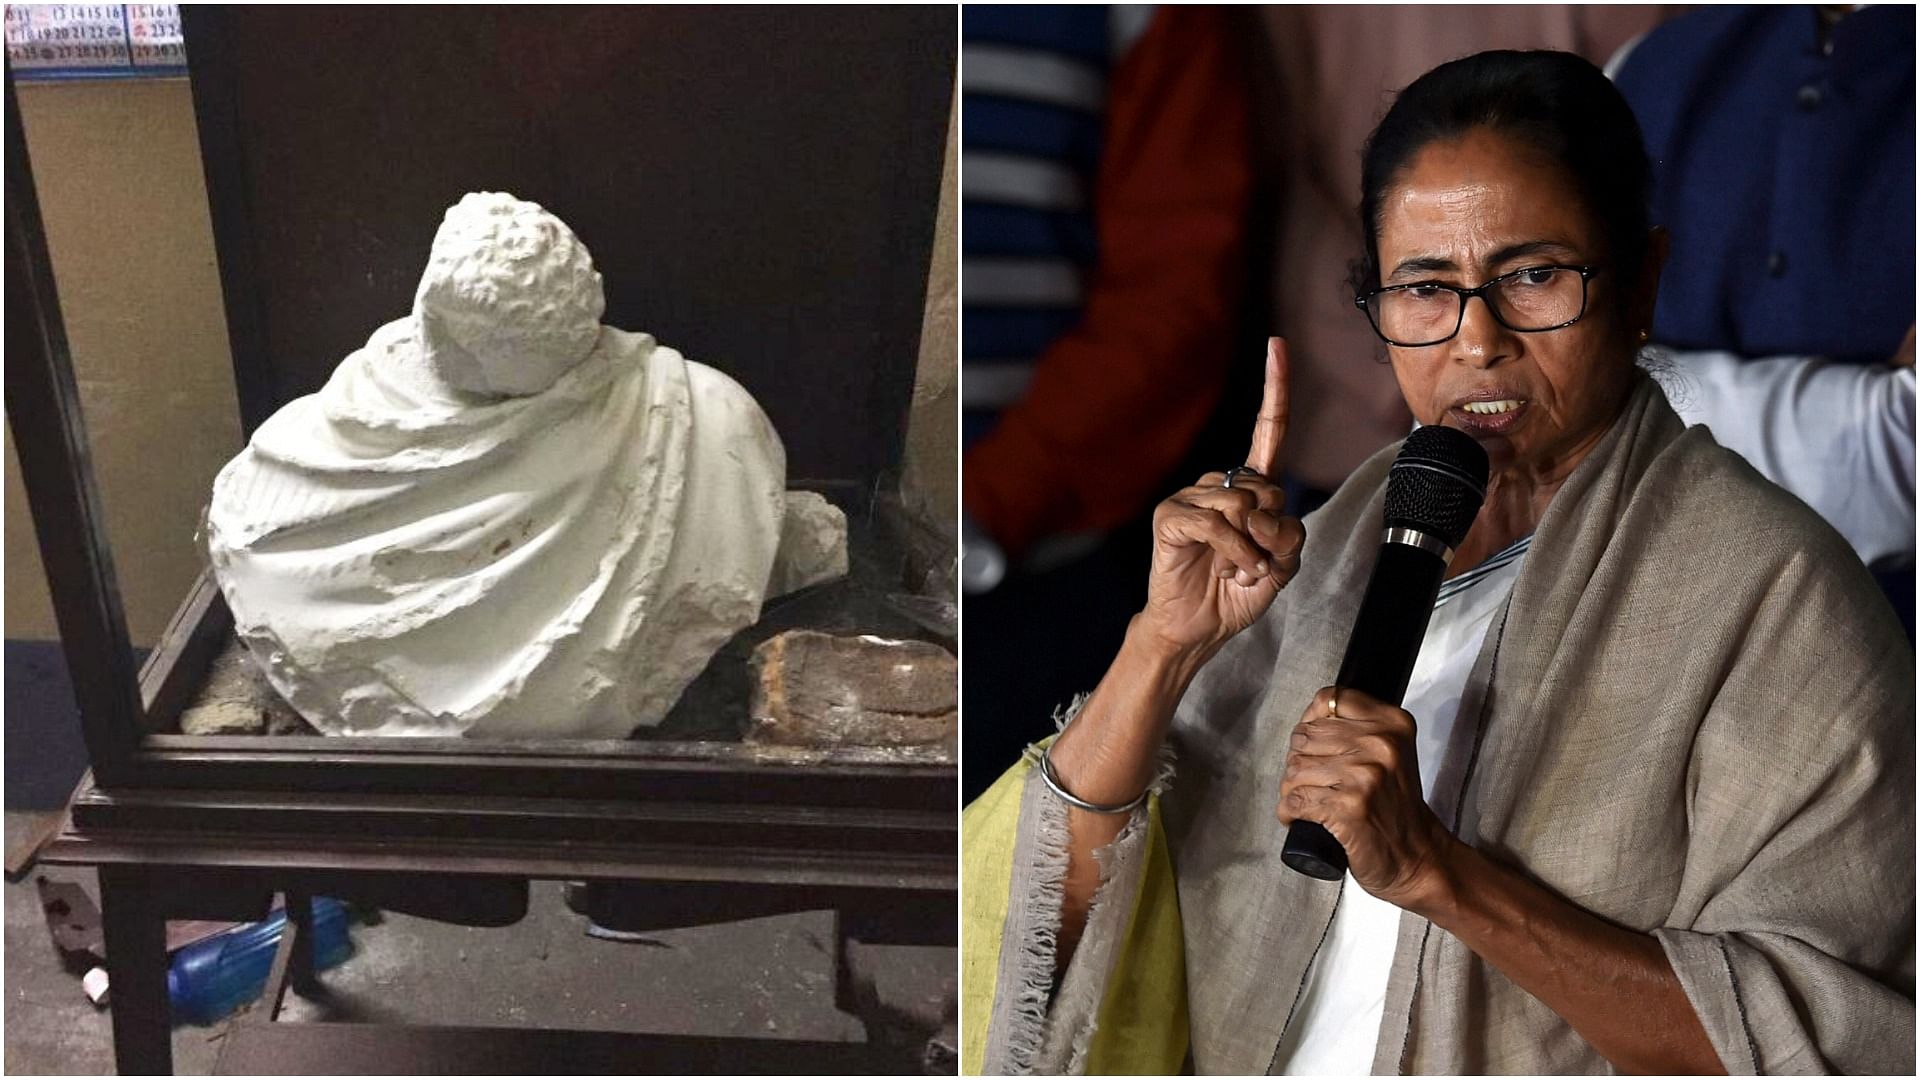 A statue of Ishwarchandra Vidyasagar which was vandalised at Vidyasagar College in clashes that broke out during BJP President Amit Shah’s roadshow in the city.